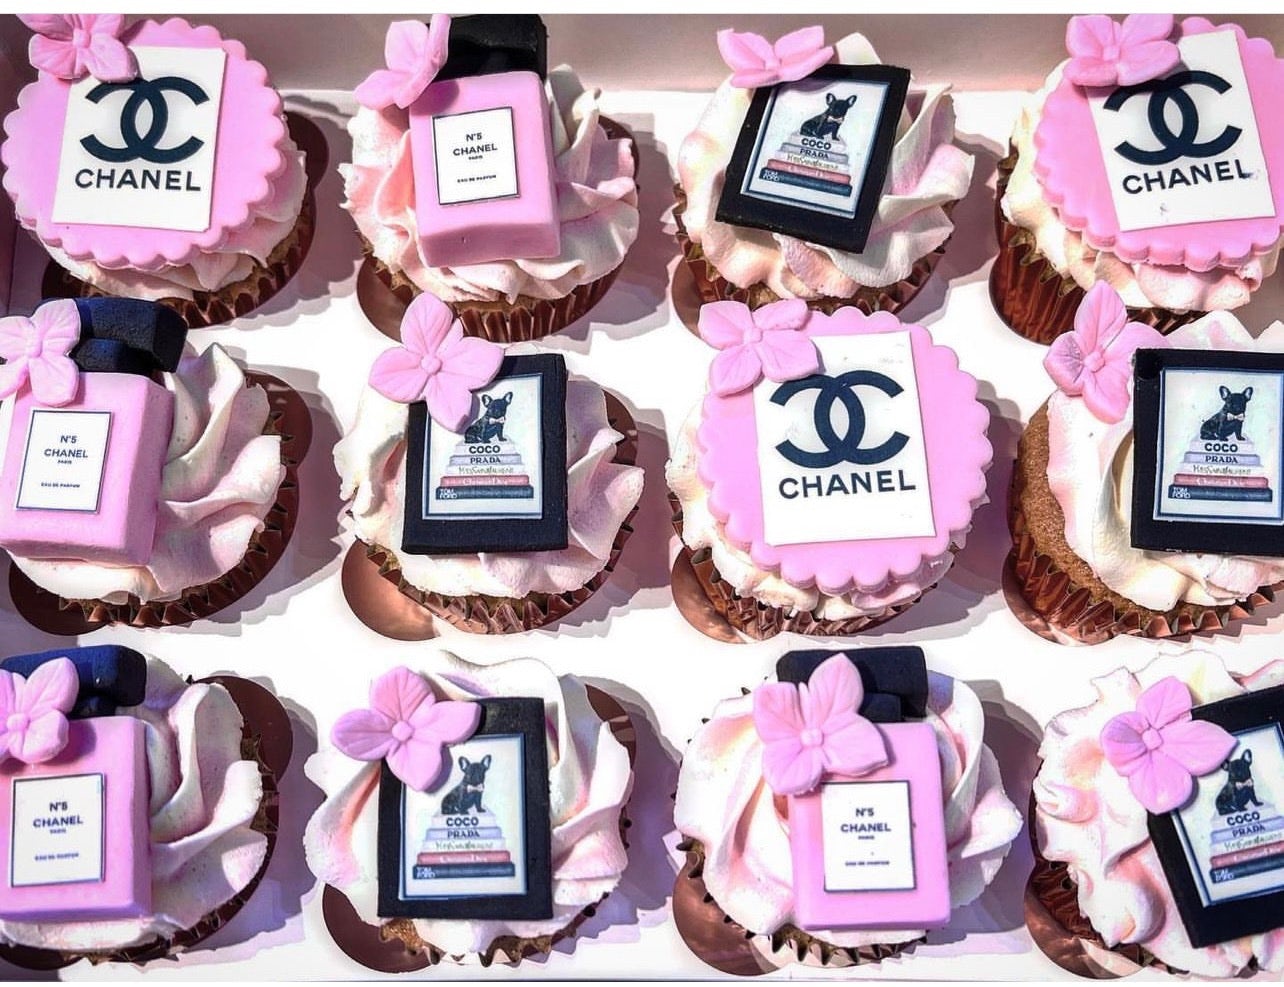 Chanel-styled cupcakes